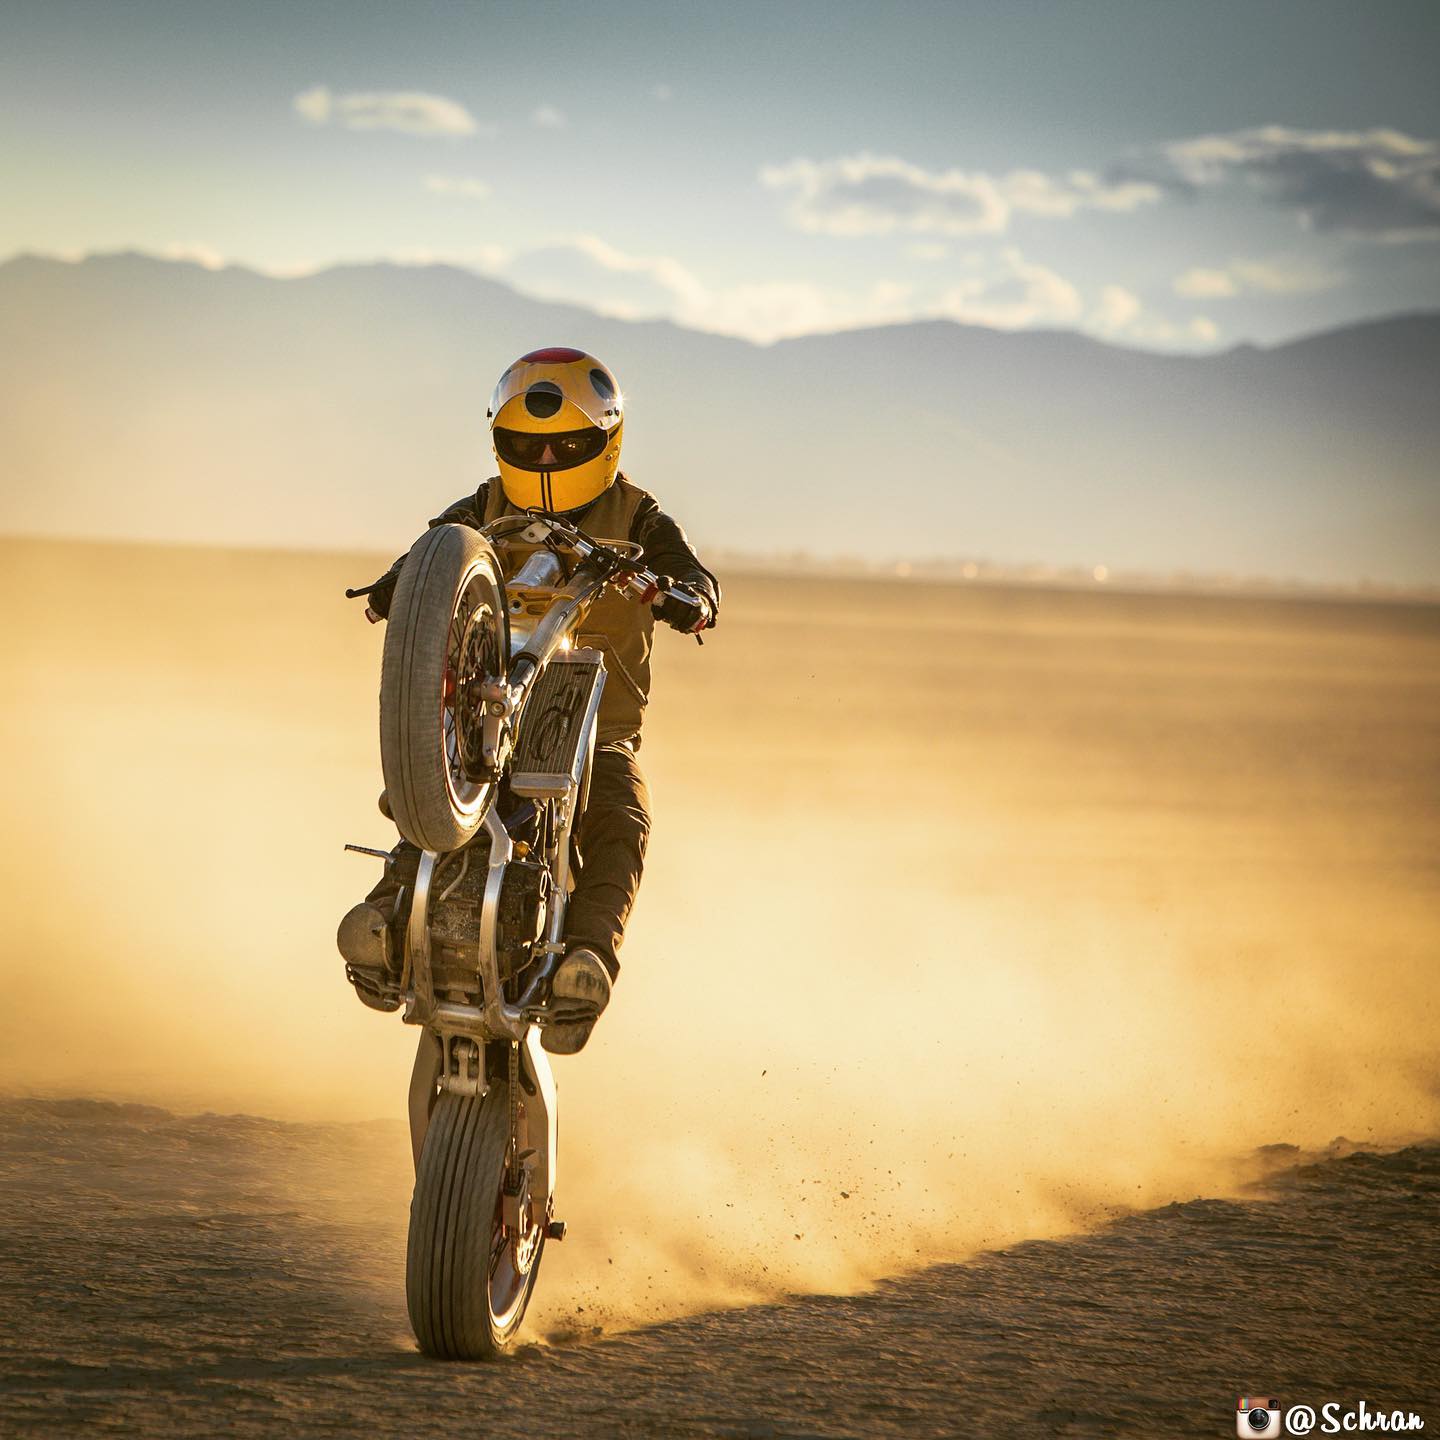 😁 Blasting into the weekend like…

Wish you all a great one. Get your toys out & play with them

🧙🏻‍♂️ @smokingseagulls 
📍 The Playa

#blastingintotheweekend #custombikes #blackrockdesert #desert #nevada #usa #drakemcelroy #smookingseagul #ccmotorcycles
#custombikes #honda #coffeeracer #motorcycles #wheelie #getyourtoysout #ridetoparty #weekendwarrior #weekend #sundayfunday 
#playriding #style #gerlach #onthemoon #goodtimes #memories #blastfromthepast #motosoul #2014